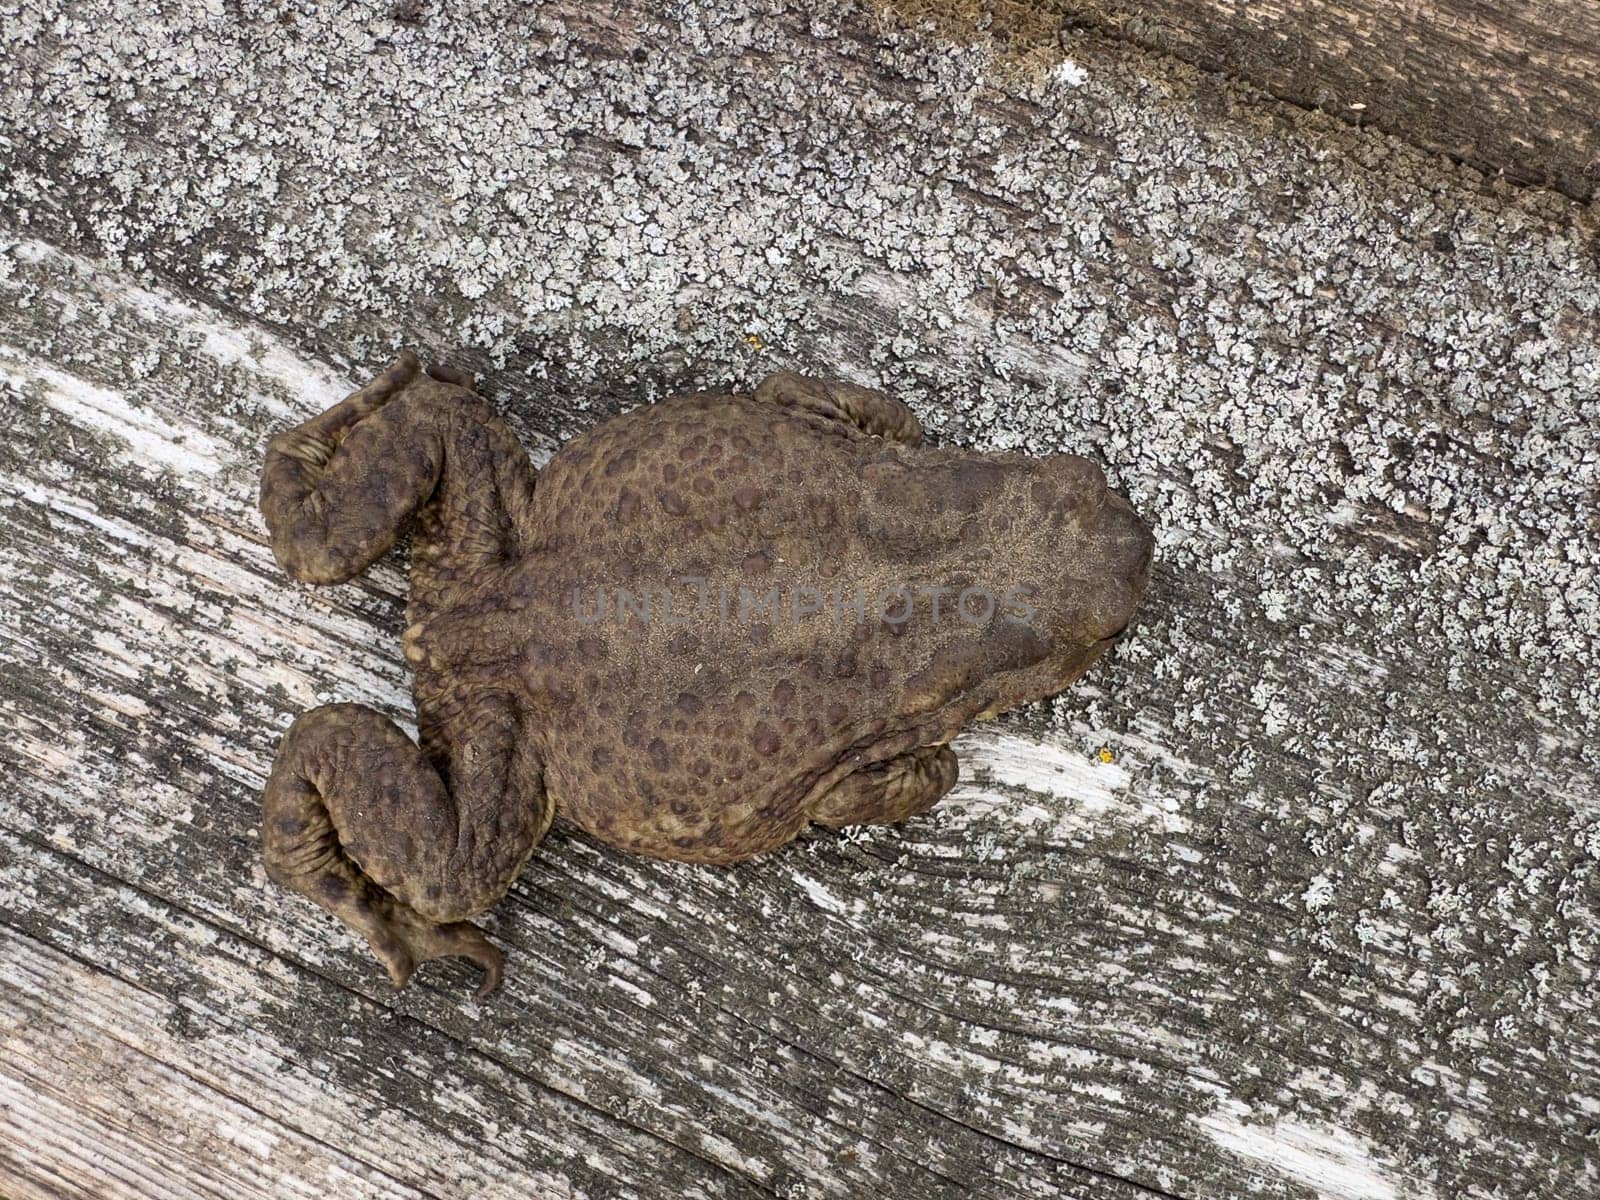 frog watching on the ground in summer